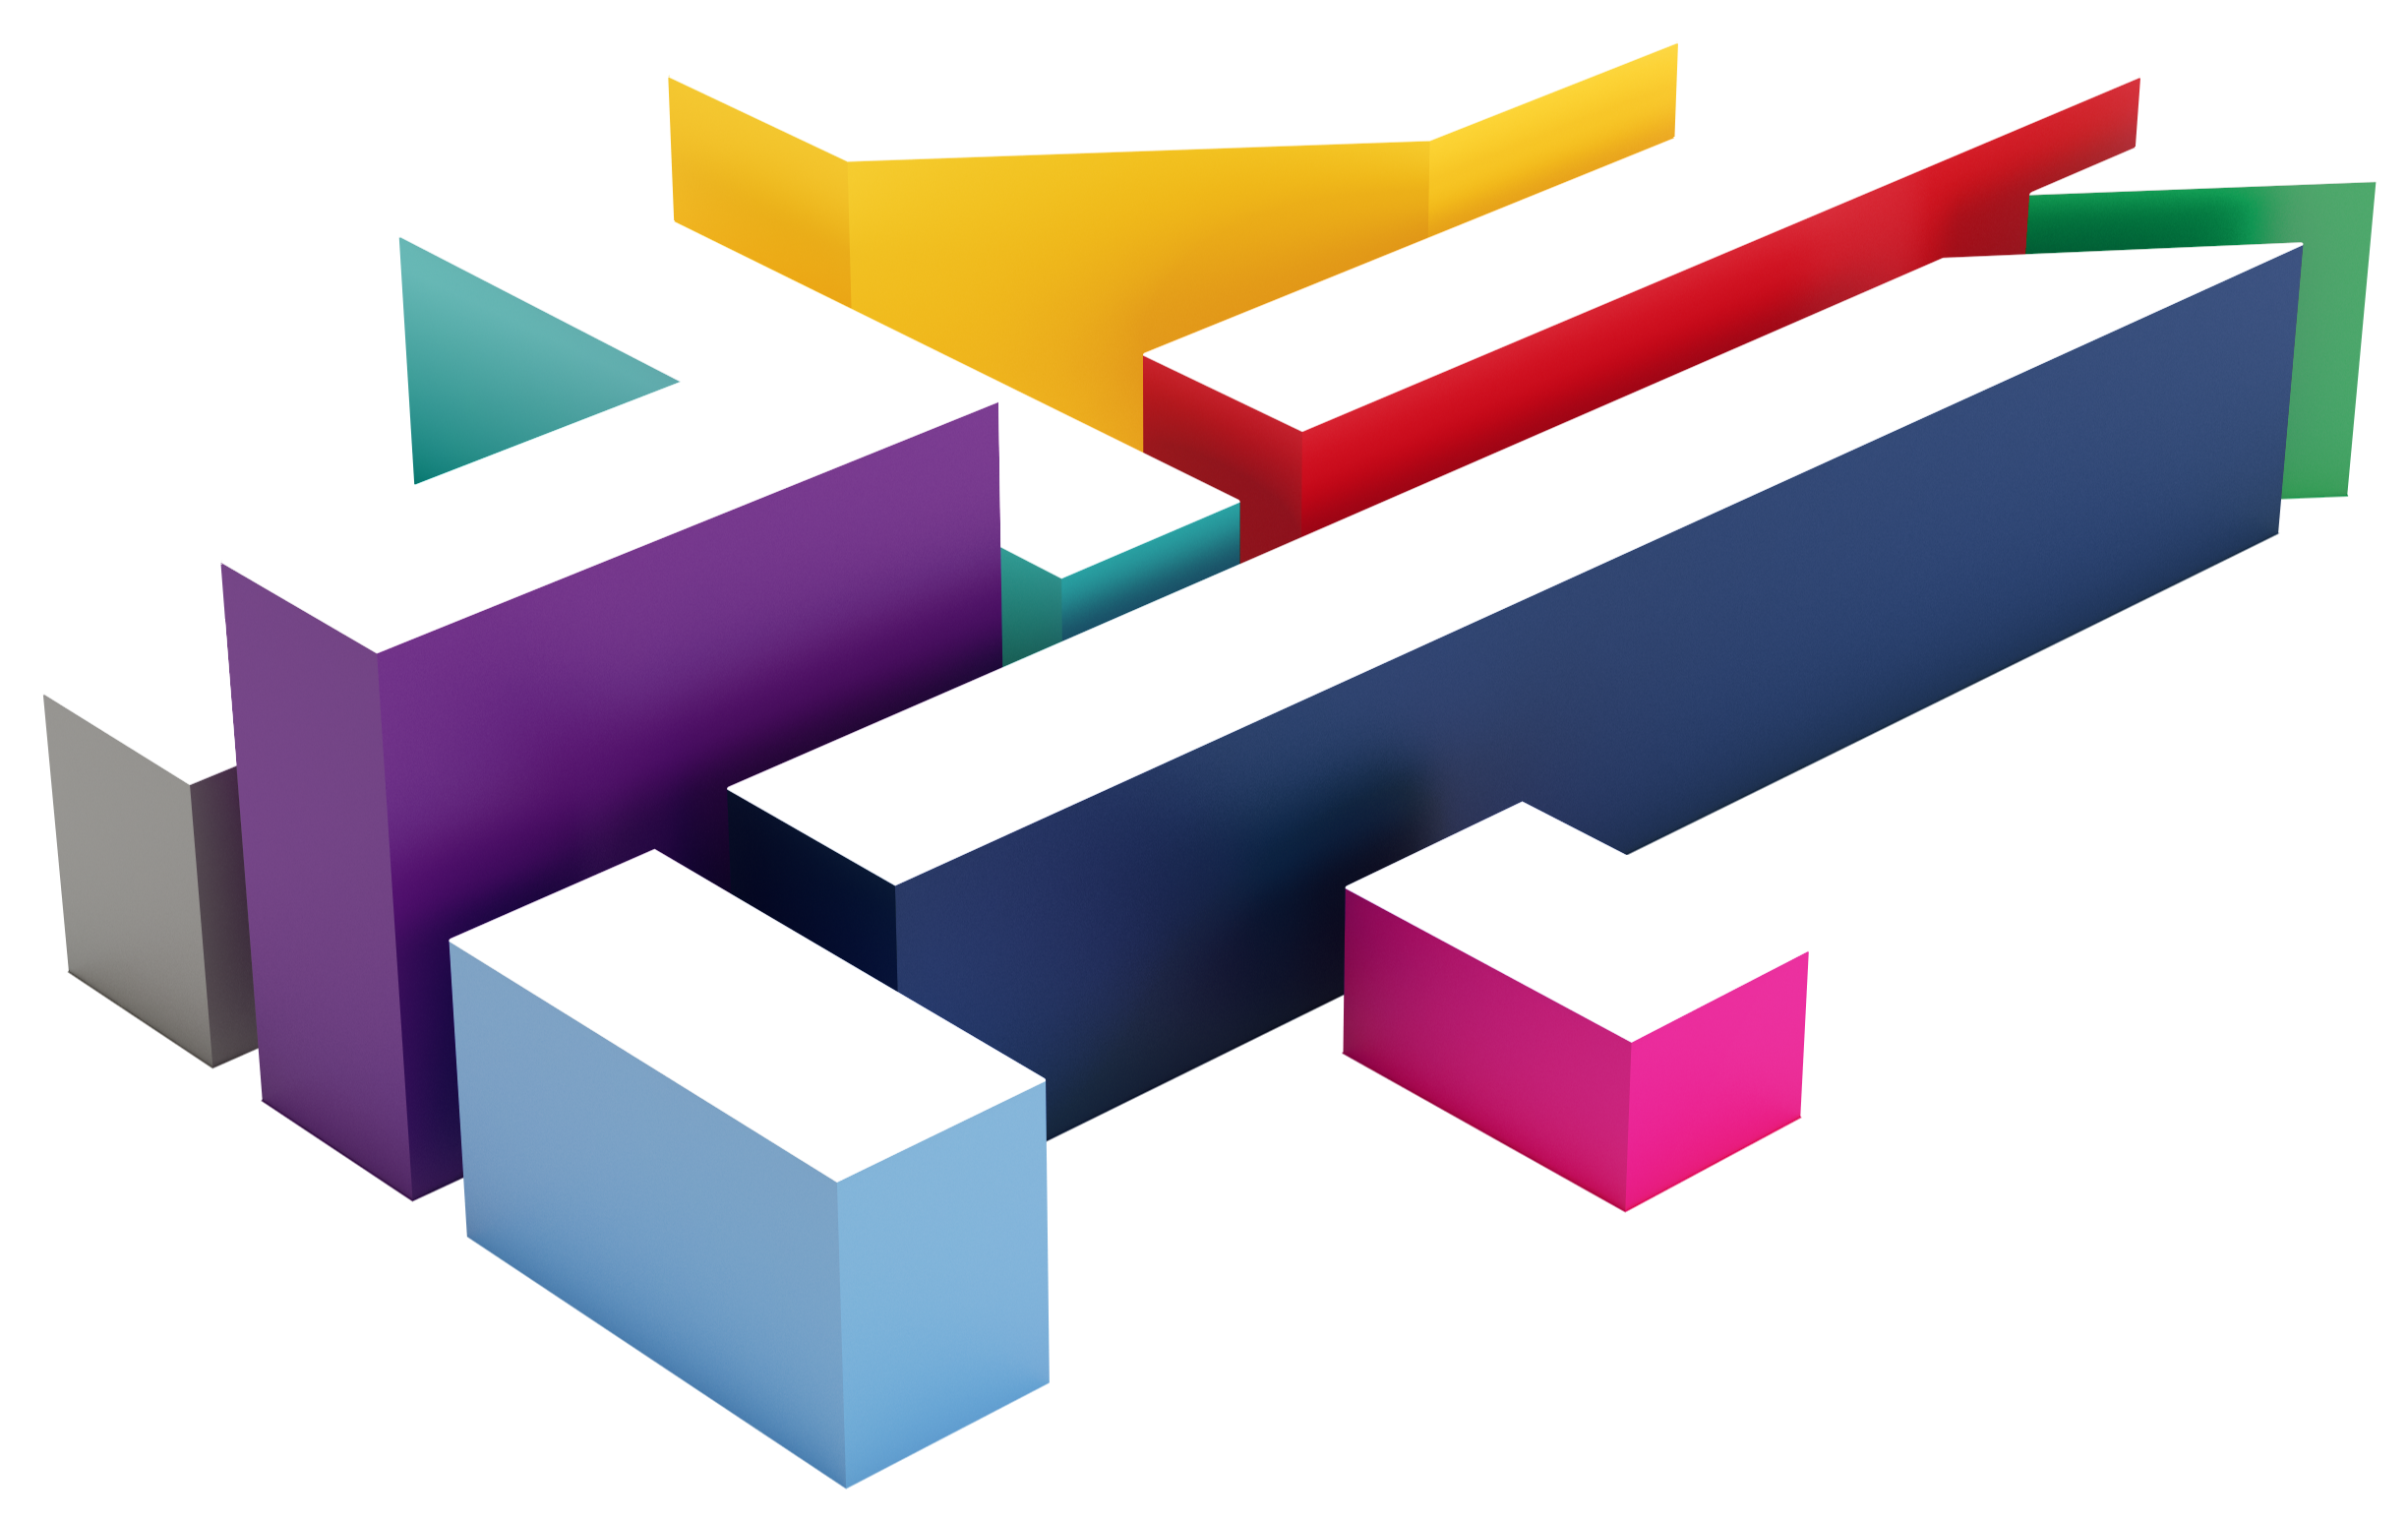 Channel 4. Channel 4 uk. All 4. E4 (TV channel).